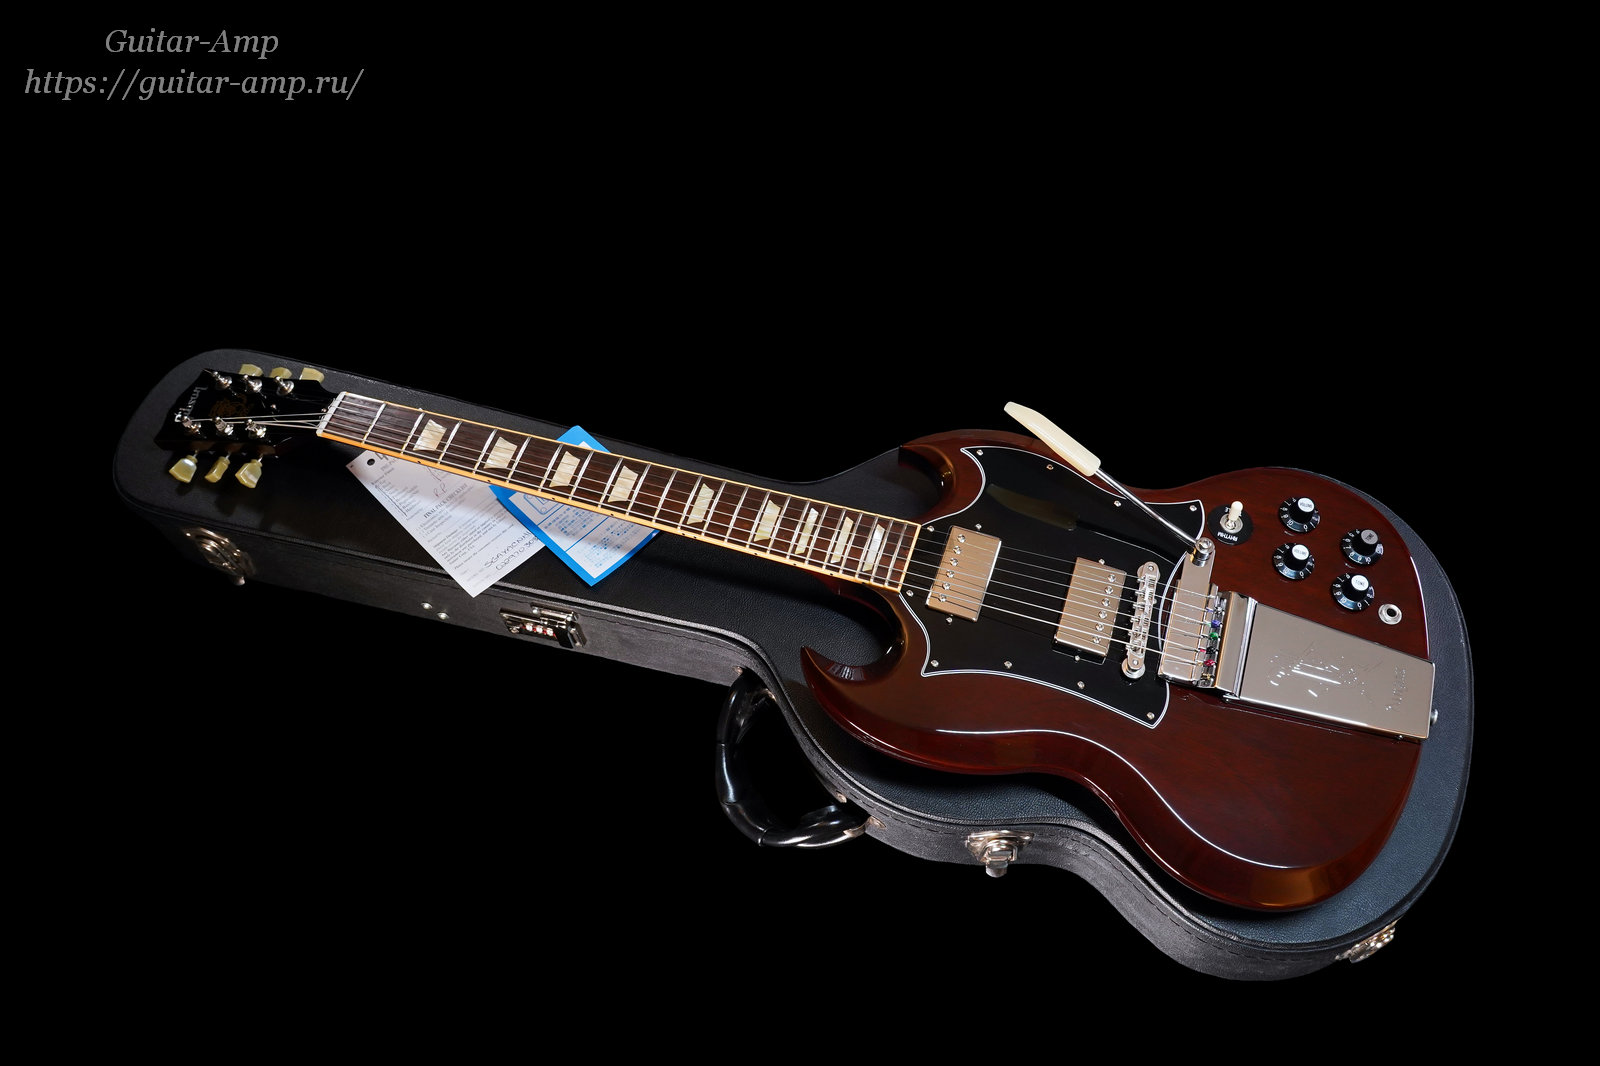 Gibson SG Angus Young Limited Run Aged Cherry 2007 01x1600.jpg